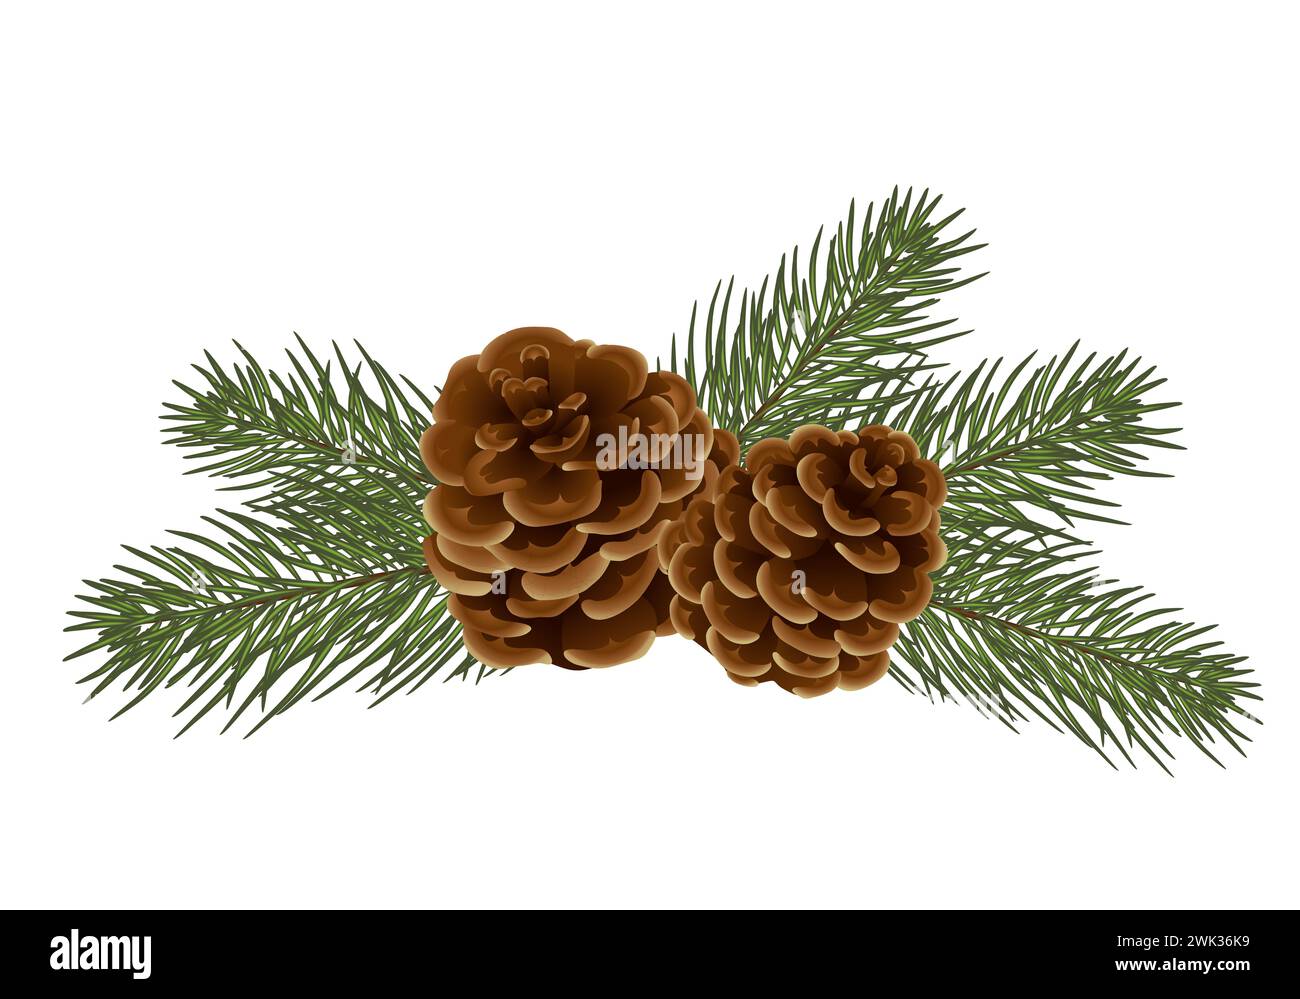 Cute christmas composition - tree branches / cedar cones. Isolated on white background without shadow. New Year. Elements of decor. for postcards, inv Stock Photo